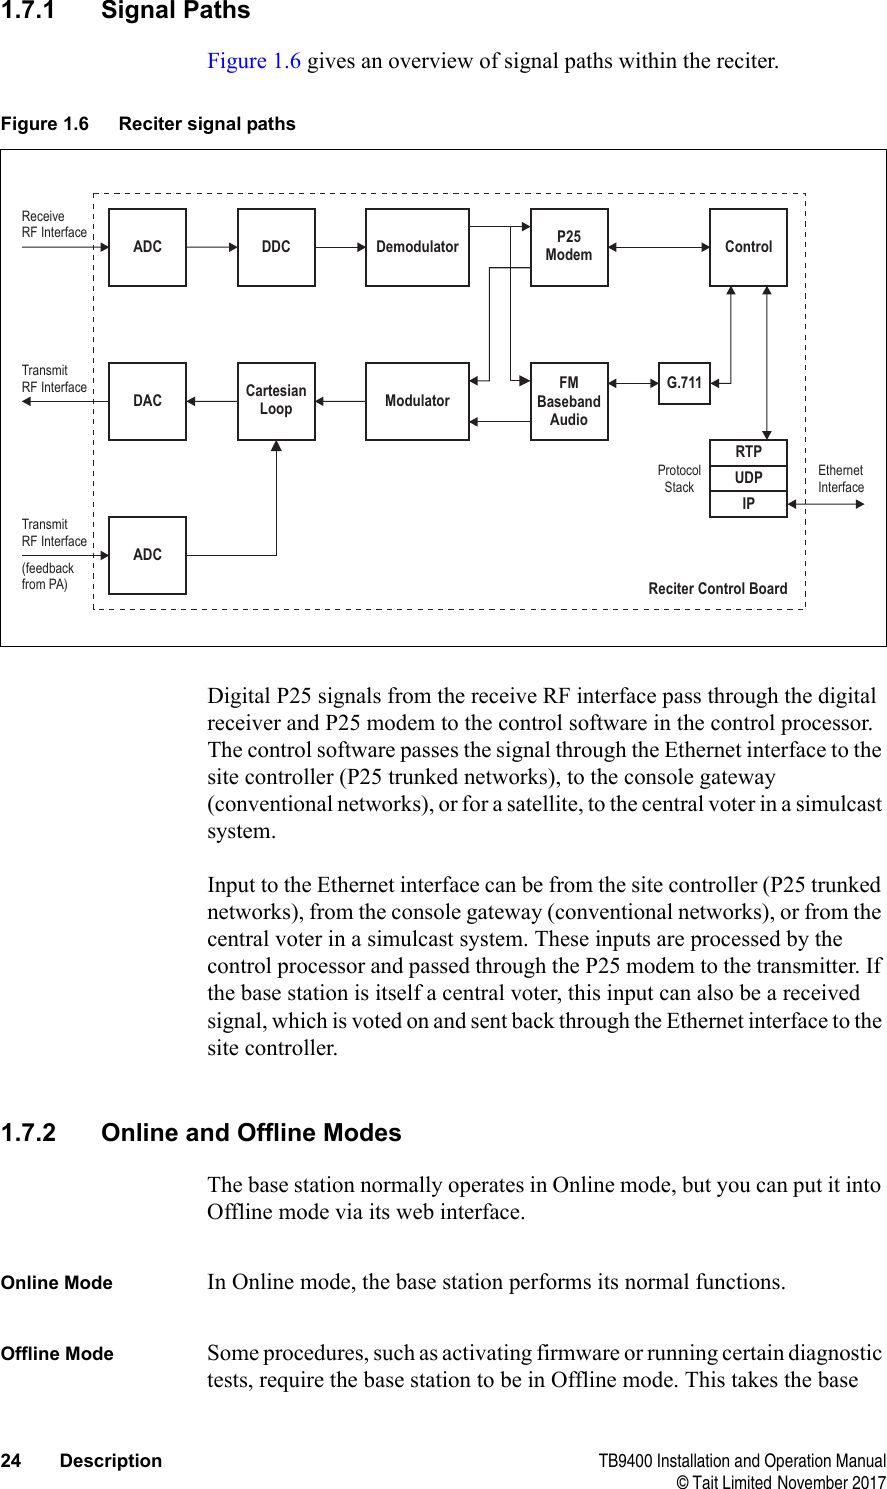  24 Description TB9400 Installation and Operation Manual© Tait Limited November 20171.7.1 Signal PathsFigure 1.6 gives an overview of signal paths within the reciter. Digital P25 signals from the receive RF interface pass through the digital receiver and P25 modem to the control software in the control processor. The control software passes the signal through the Ethernet interface to the site controller (P25 trunked networks), to the console gateway (conventional networks), or for a satellite, to the central voter in a simulcast system.Input to the Ethernet interface can be from the site controller (P25 trunked networks), from the console gateway (conventional networks), or from the central voter in a simulcast system. These inputs are processed by the control processor and passed through the P25 modem to the transmitter. If the base station is itself a central voter, this input can also be a received signal, which is voted on and sent back through the Ethernet interface to the site controller.1.7.2 Online and Offline ModesThe base station normally operates in Online mode, but you can put it into Offline mode via its web interface.Online Mode In Online mode, the base station performs its normal functions. Offline Mode Some procedures, such as activating firmware or running certain diagnostic tests, require the base station to be in Offline mode. This takes the base Figure 1.6 Reciter signal pathsModulatorDemodulator P25ModemFMBasebandAudioG.711ControlADC DDCDACRTPUDPIPTransmitRF InterfaceReceiveRF InterfaceEthernetInterfaceProtocolStackReciter Control BoardCartesianLoopADCTransmitRF Interface(feedbackfrom PA)